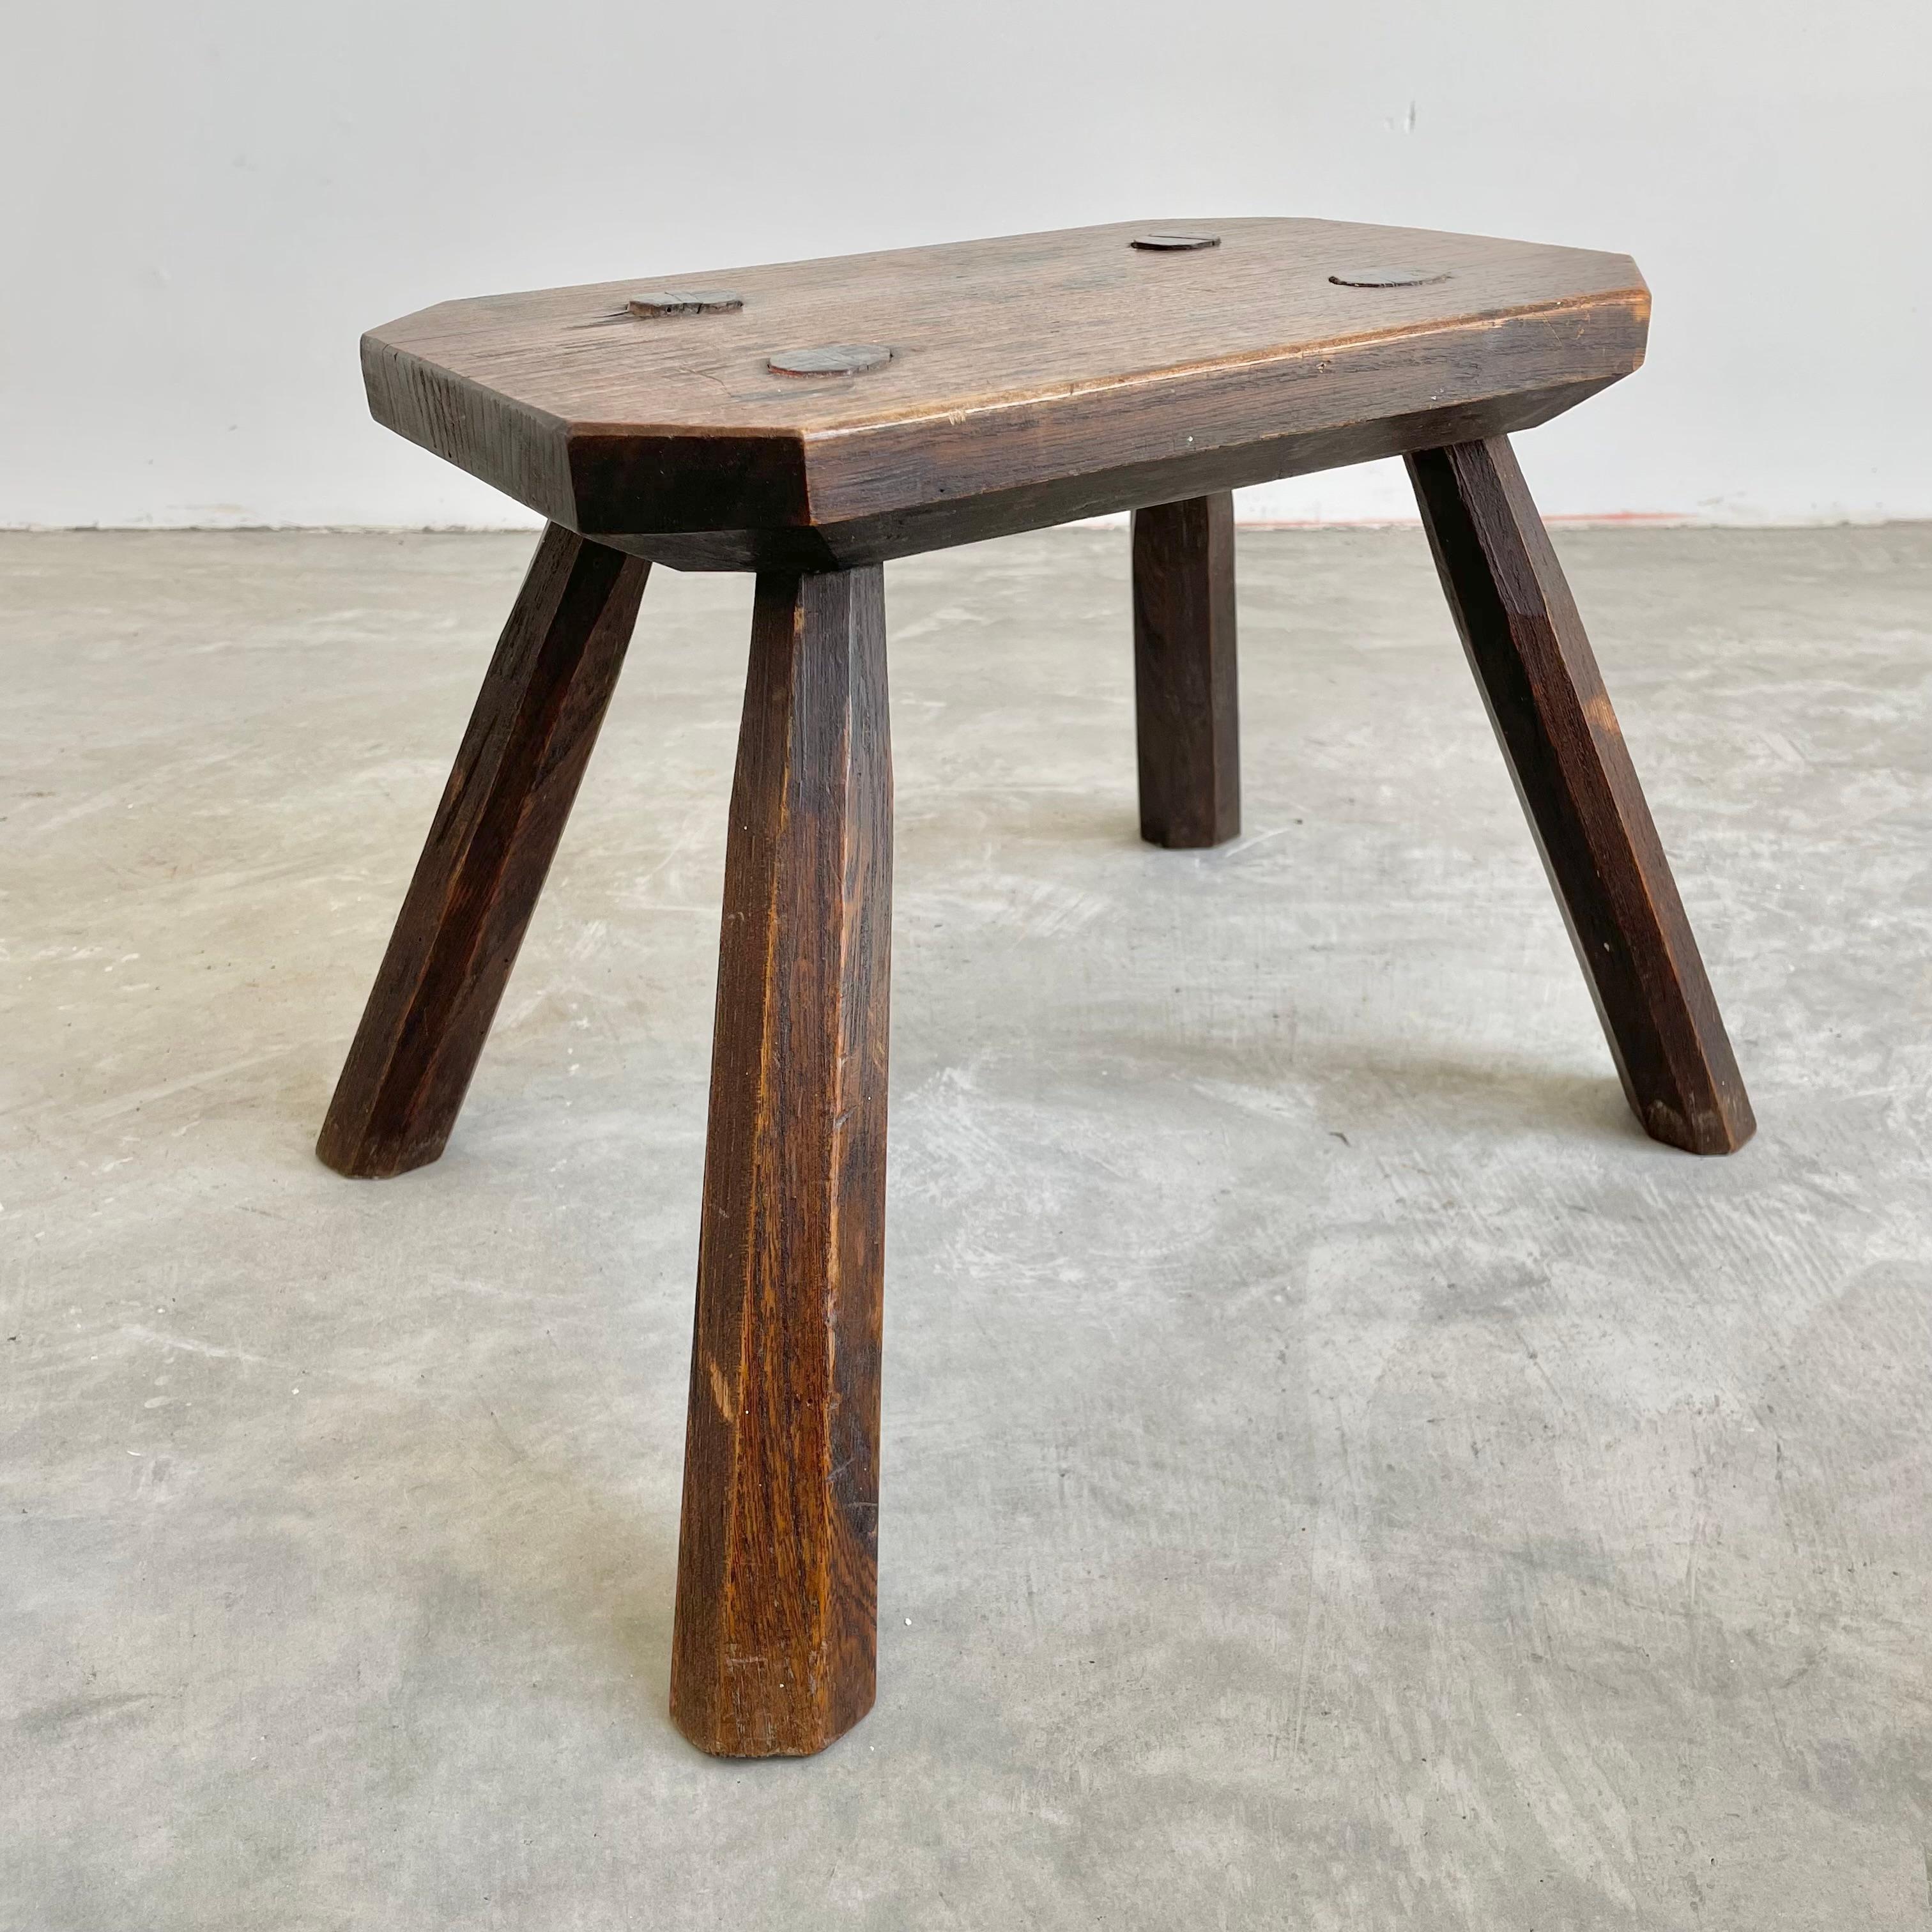 Chunky wooden stool made in France, circa 1960s. Tapered seat and tapered legs. Substantial stool with great lines and posture. Darkened patina and grain to the wood. Perfect for books or objects.
 